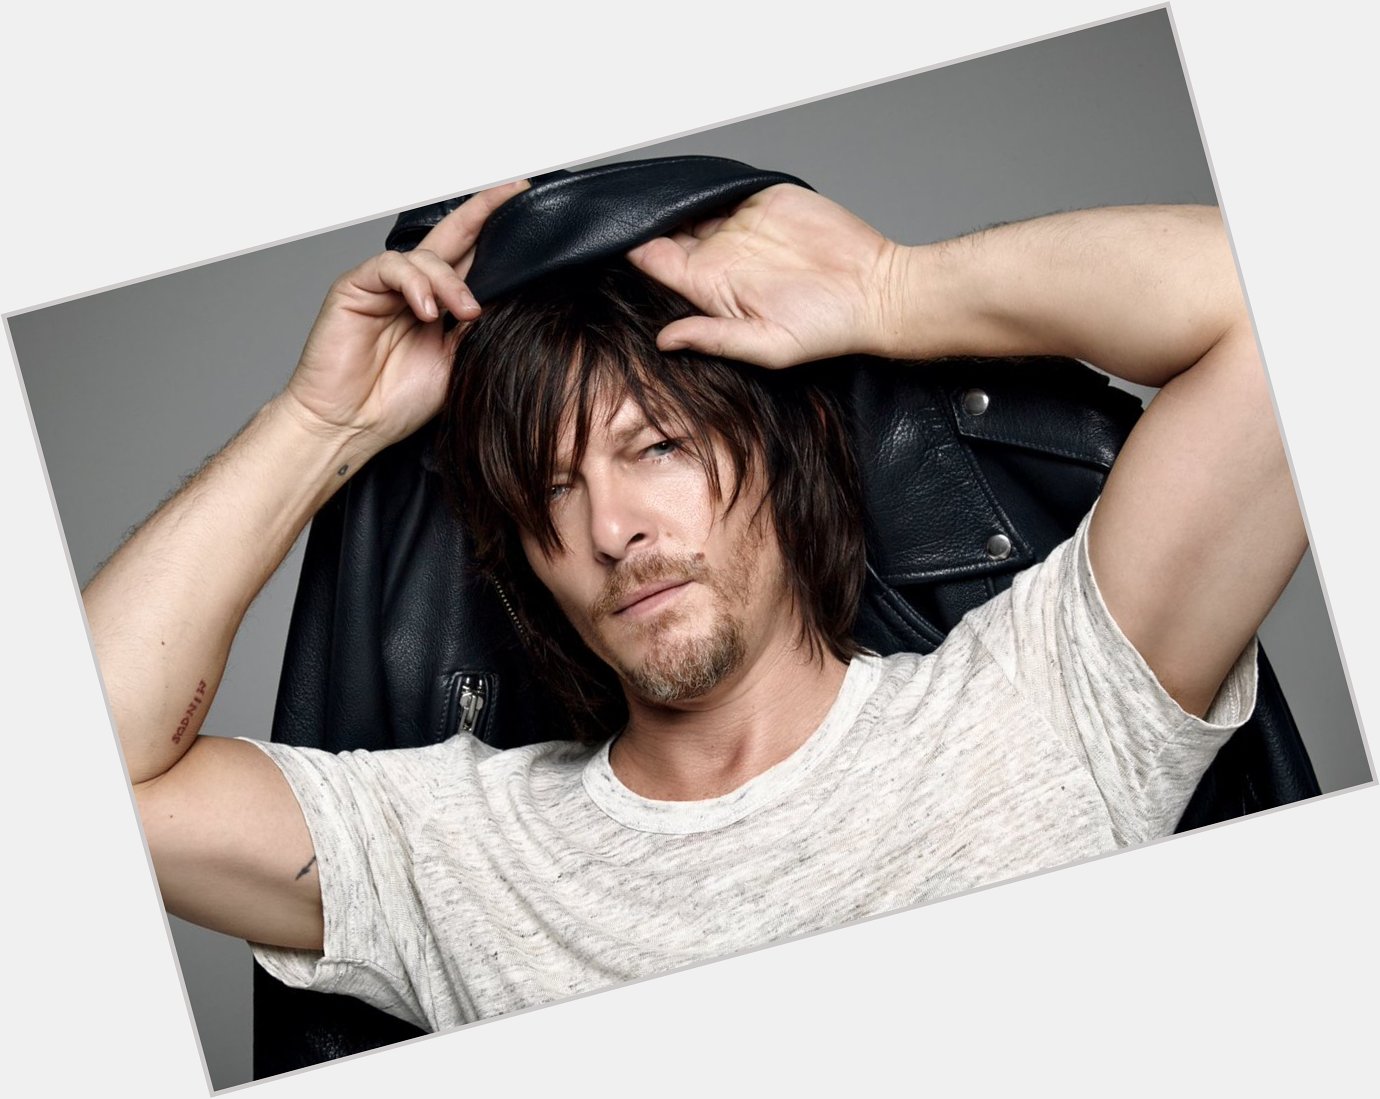 Happy birthday Norman Reedus, , hope you have an amazing day! 